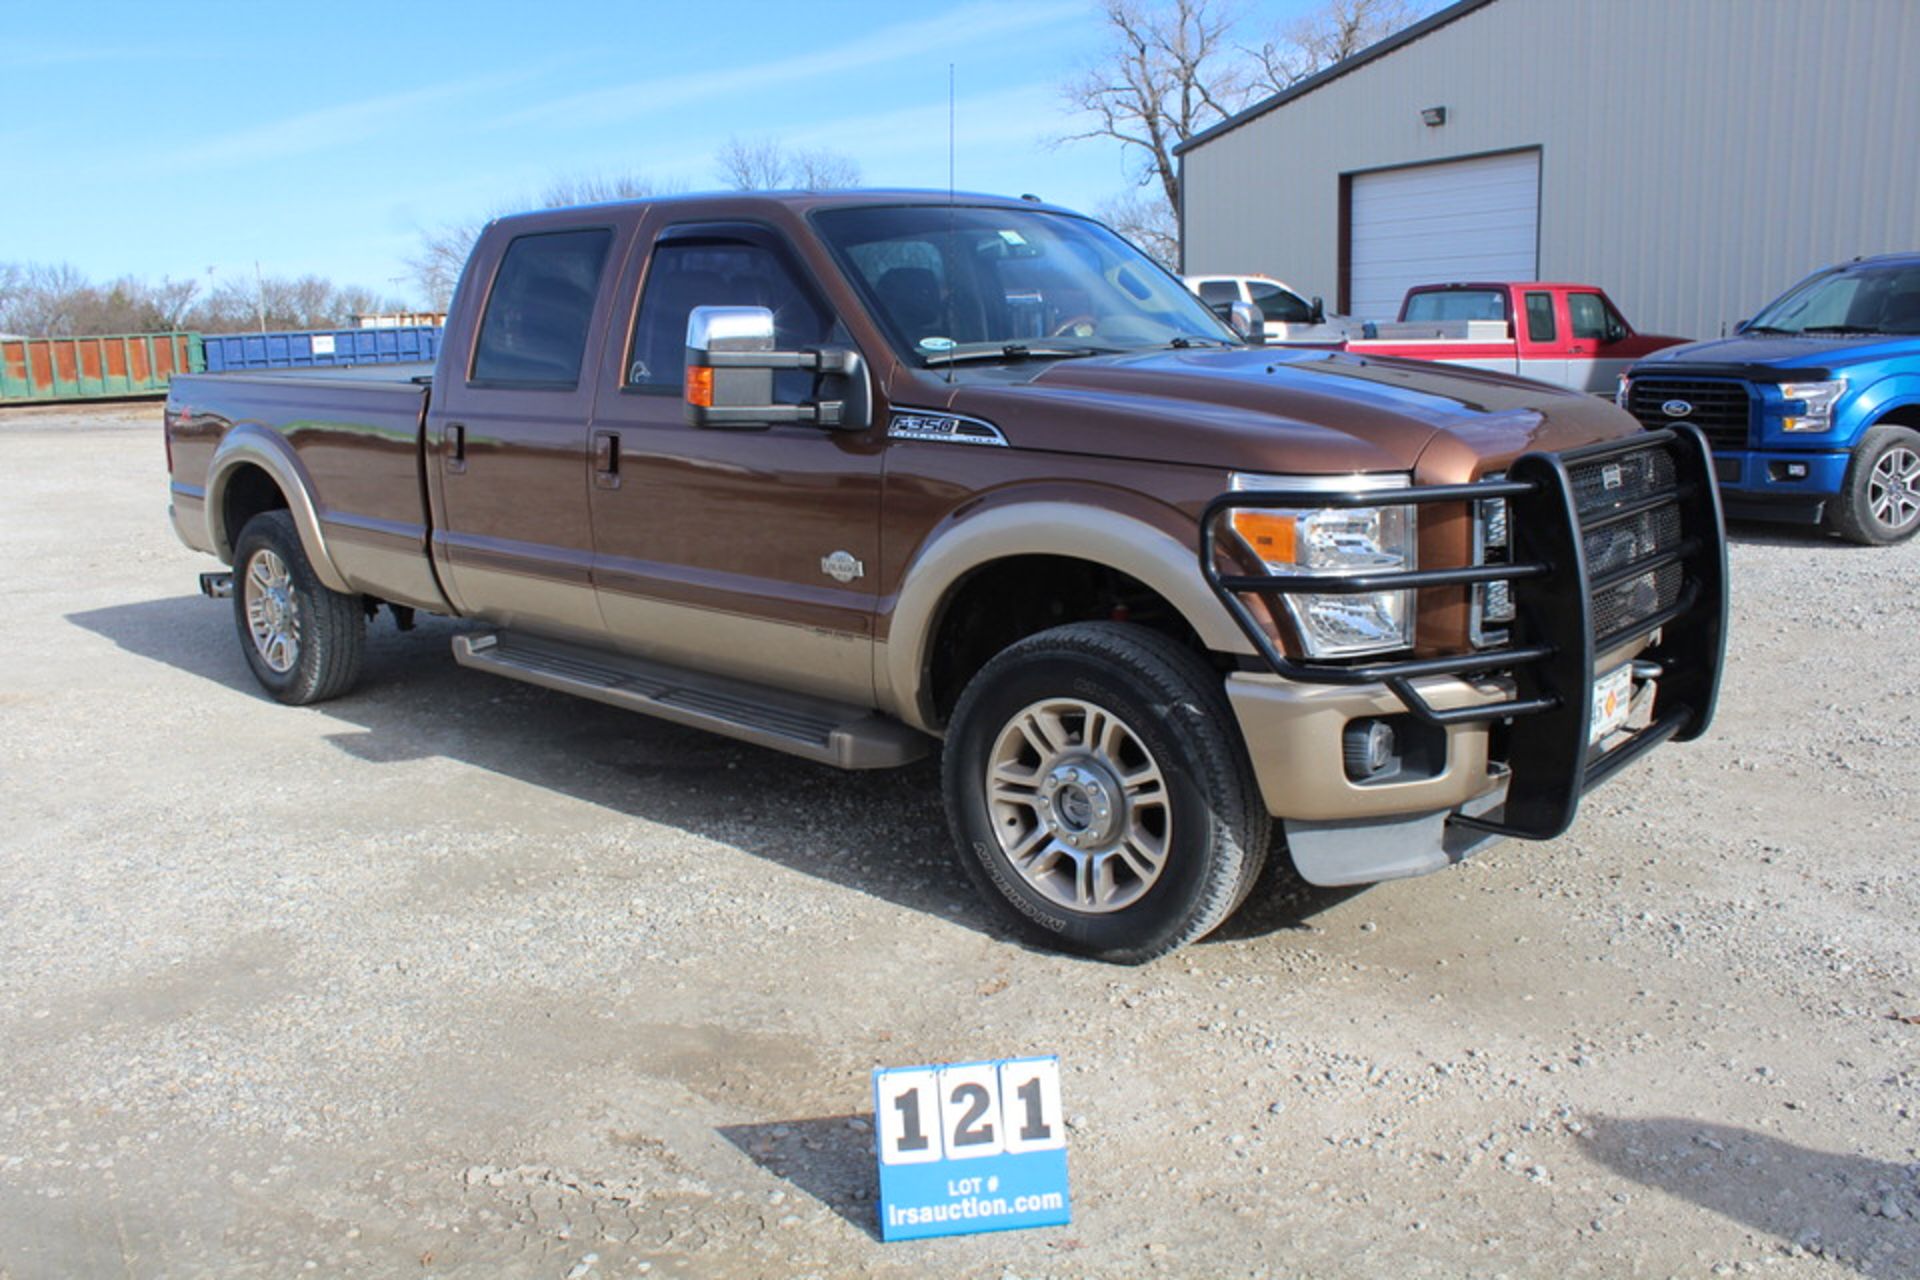 2010 FORD 350 KINGRANCH LONG BED TRUCK, SINGLE REARWHEEL, APPROX 110,000 MILES, SUNROOF, NAVIGATION - Image 2 of 3